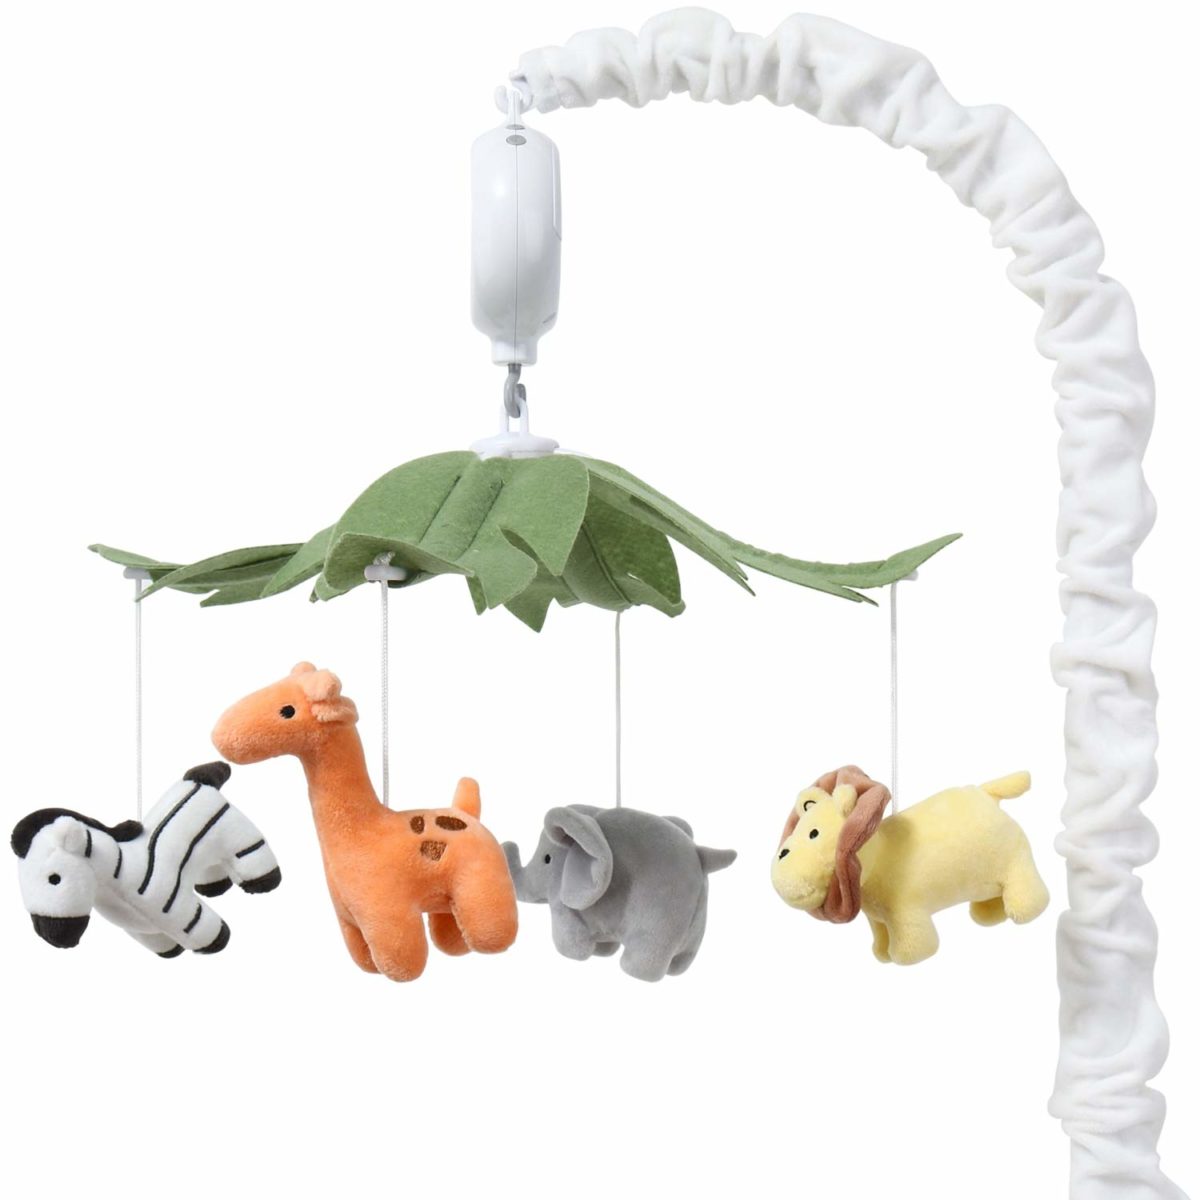 baby mobile for cribs that add a touch of whimsy